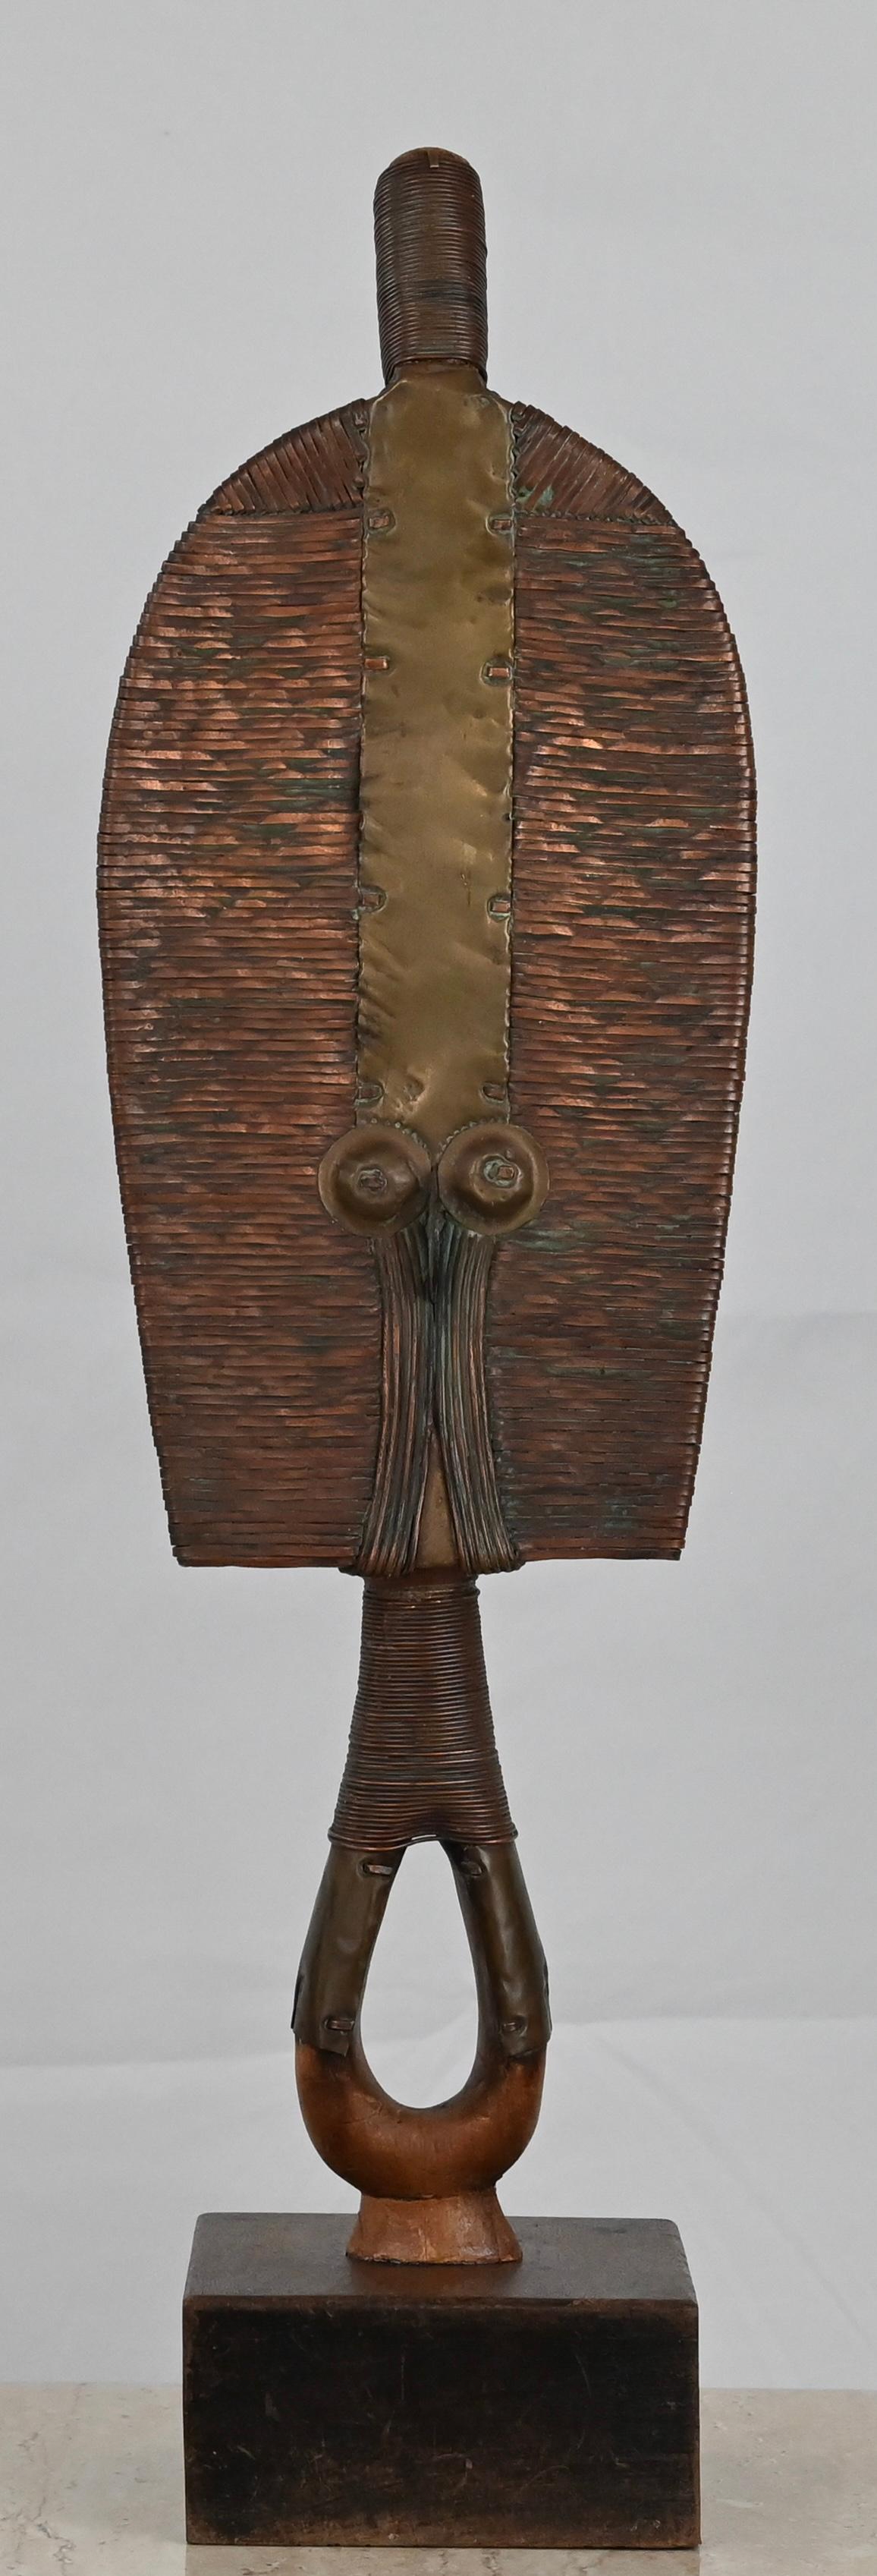 20th Century African Tribal Statue Osseyba or Reliquary Figure Kota Mohongwe Peoples Art For Sale